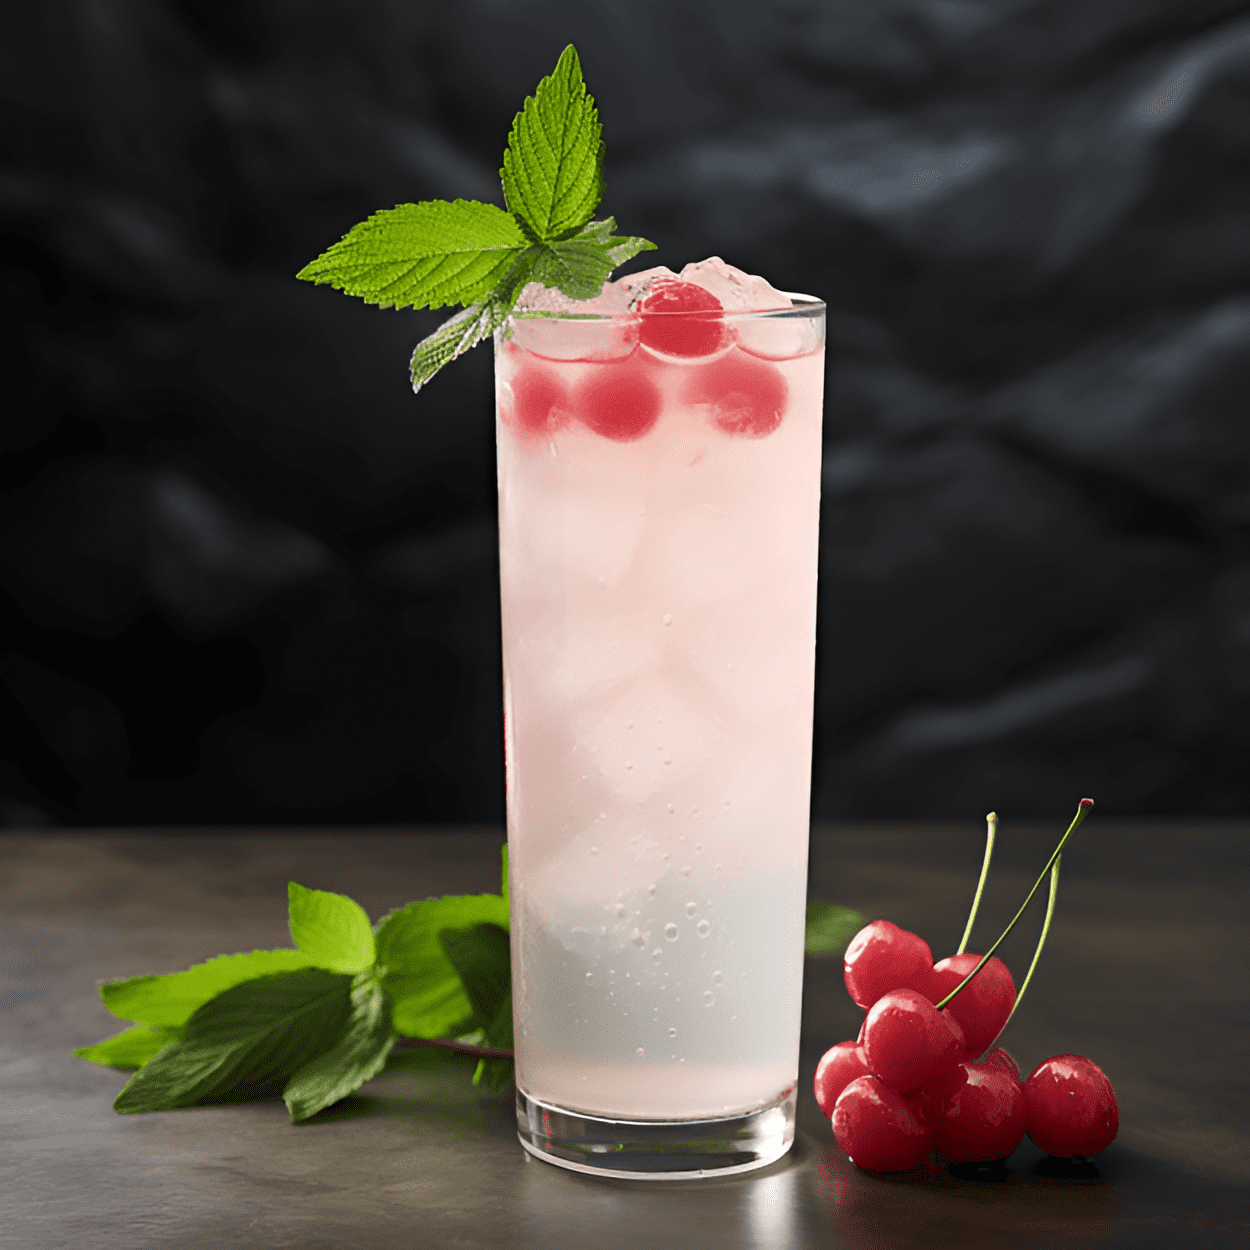 Lychee Soju Cocktail Recipe - The Lychee Soju cocktail is a sweet, fruity, and refreshing drink. The lychee adds a distinct tropical sweetness, while the Soju provides a smooth, slightly sweet, and clean finish. It's a light cocktail that's perfect for a hot summer day.